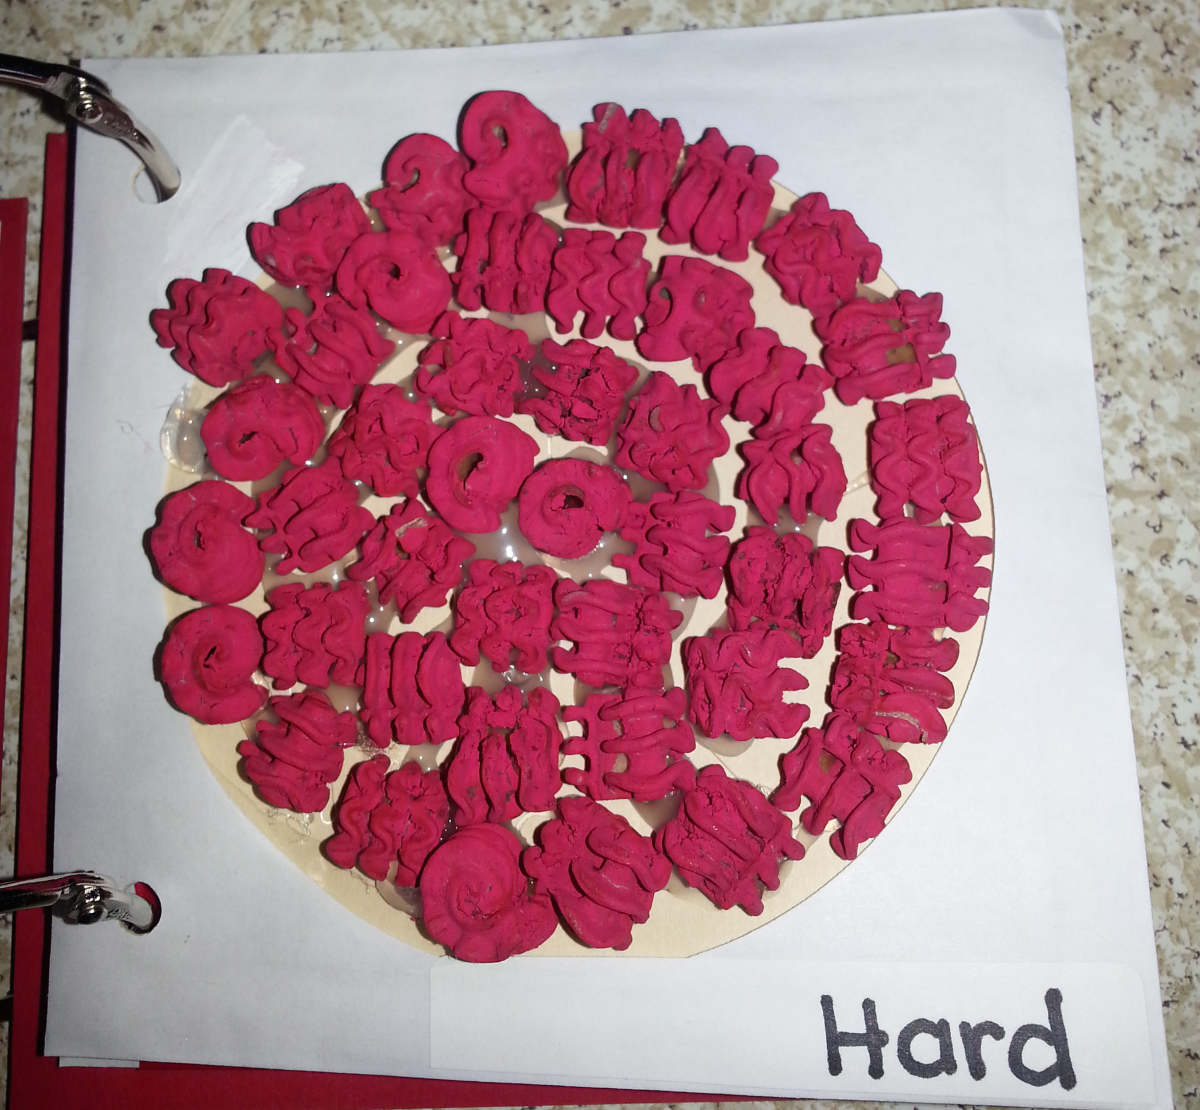 hard texture page with red circle and painted dry pasta